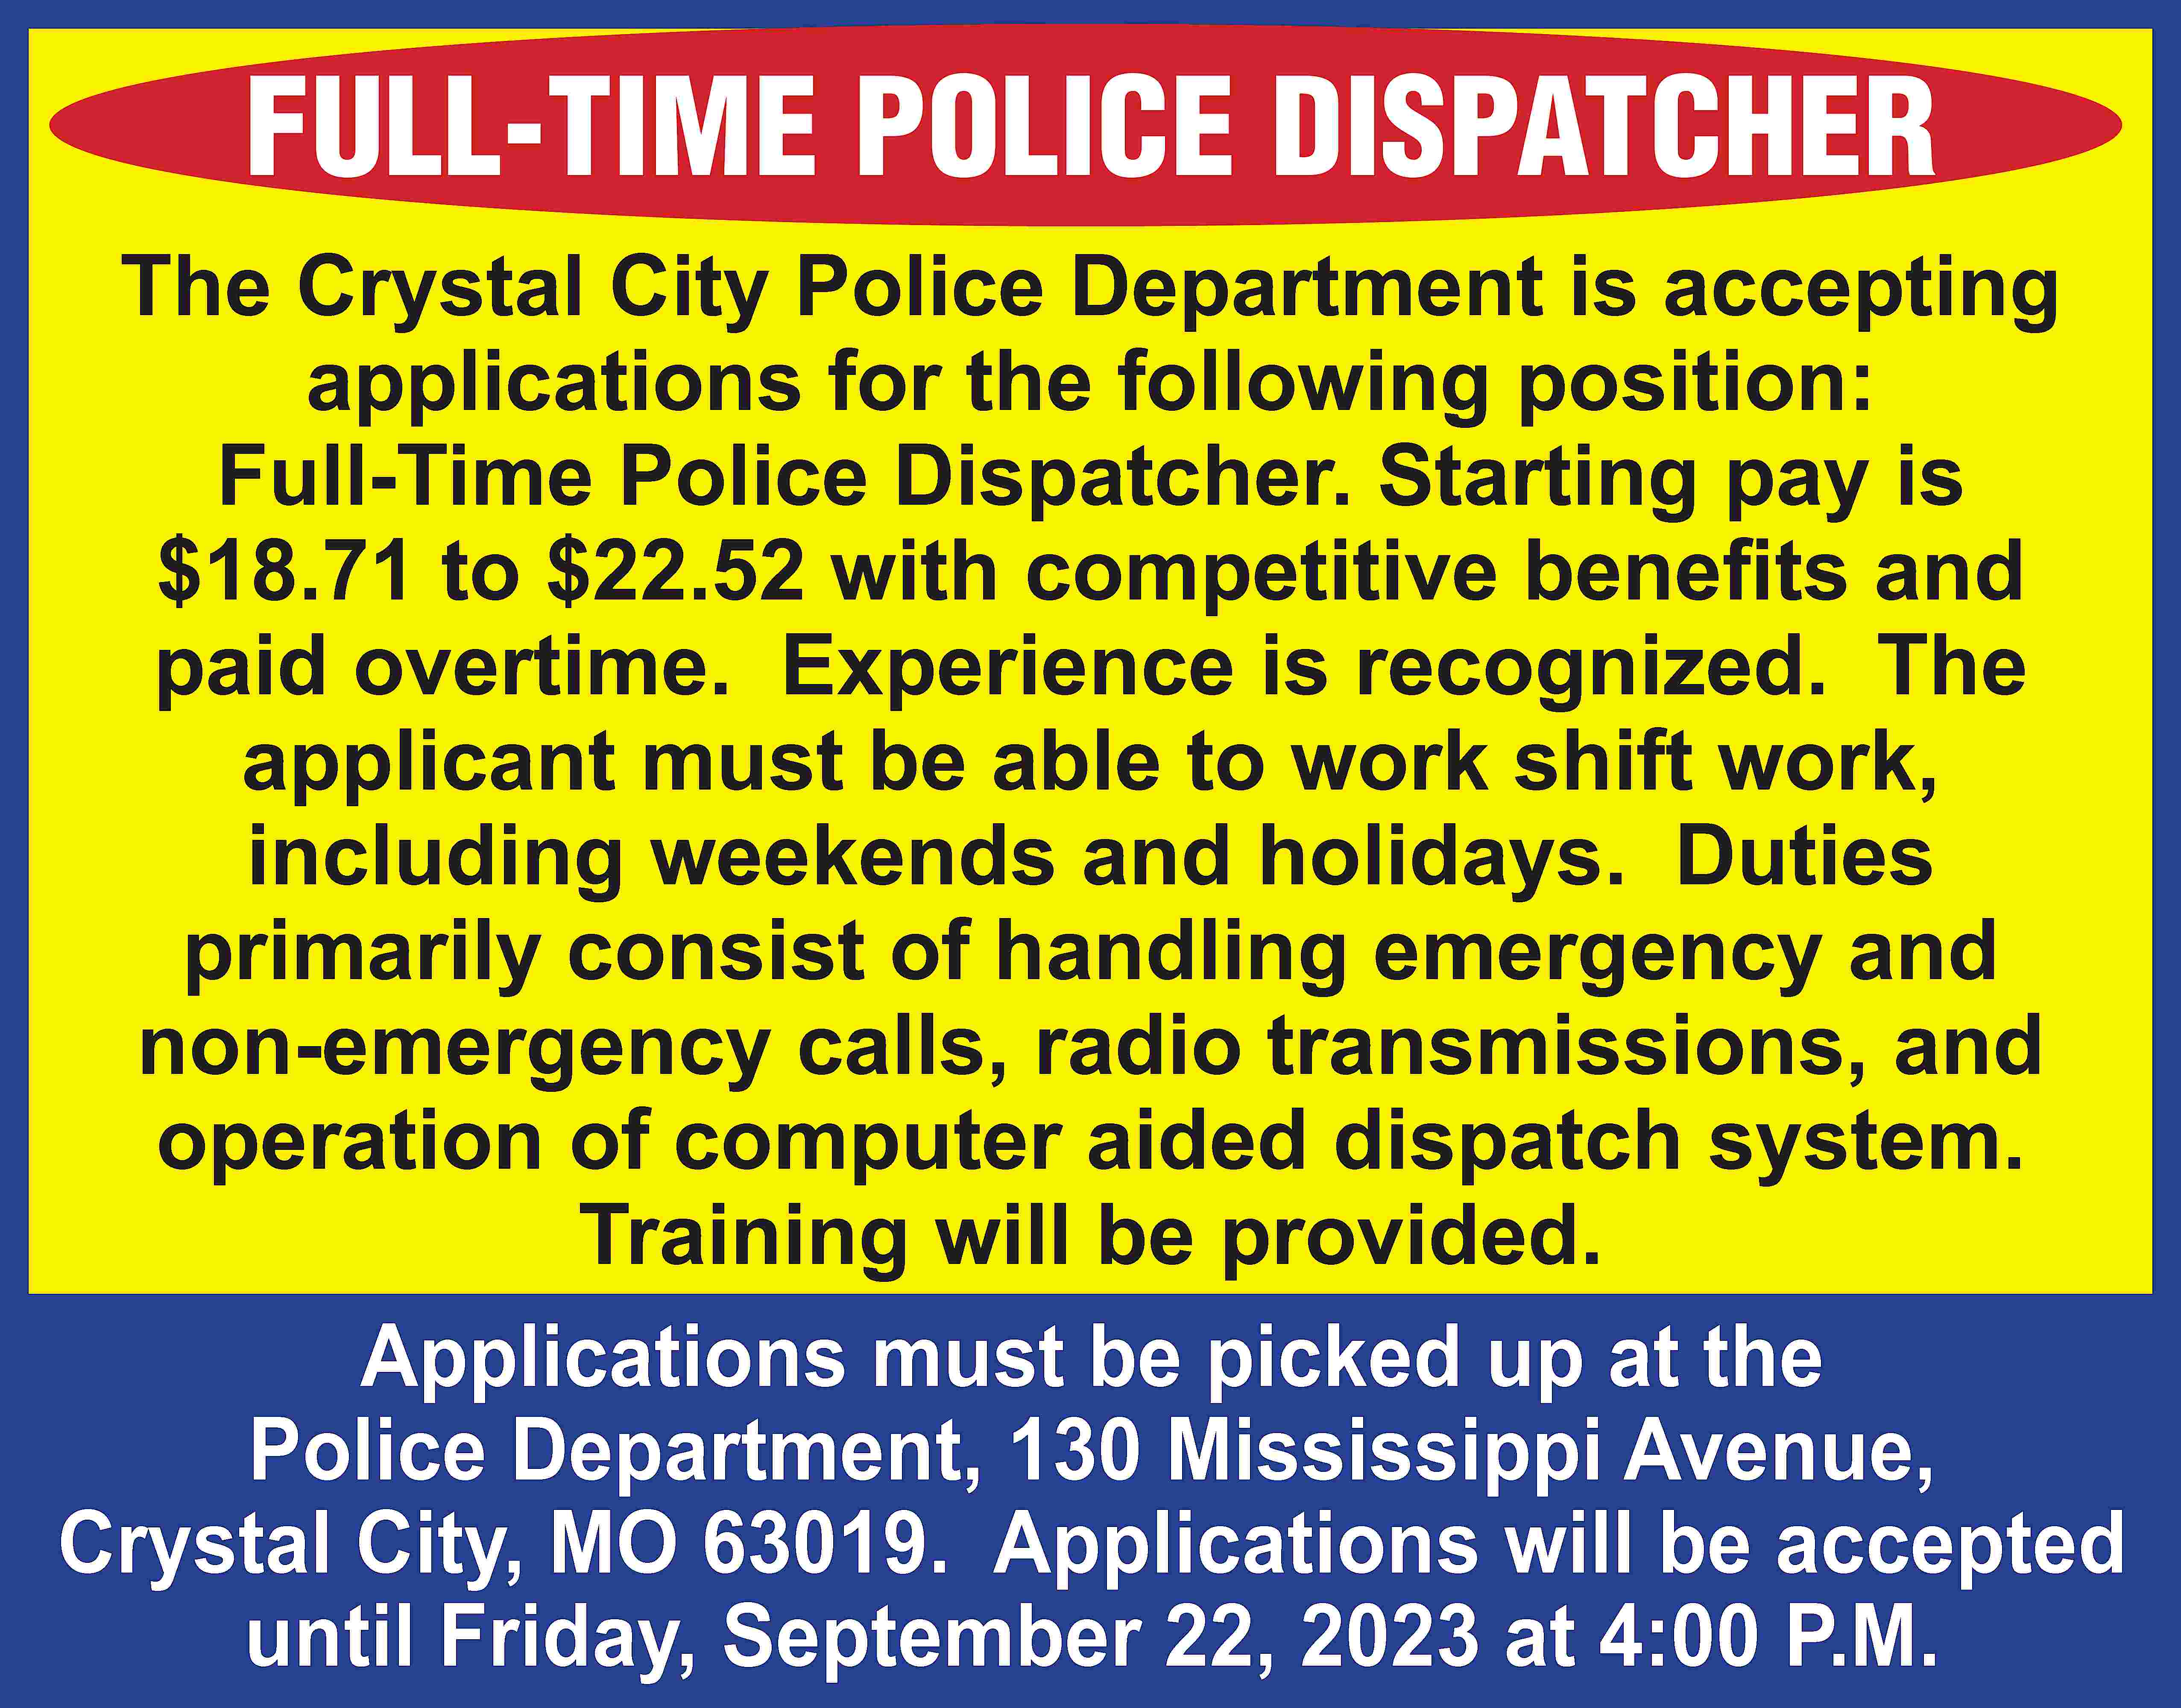 FULL-TIME POLICE DISPATCHER The Crystal  FULL-TIME POLICE DISPATCHER The Crystal City Police Department is accepting applications for the following position: Full-Time Police Dispatcher. Starting pay is $18.71 to $22.52 with competitive benefits and paid overtime. Experience is recognized. The applicant must be able to work shift work, including weekends and holidays. Duties primarily consist of handling emergency and non-emergency calls, radio transmissions, and operation of computer aided dispatch system. Training will be provided. Applications must be picked up at the Police Department, 130 Mississippi Avenue, Crystal City, MO 63019. Applications will be accepted until Friday, September 22, 2023 at 4:00 P.M.